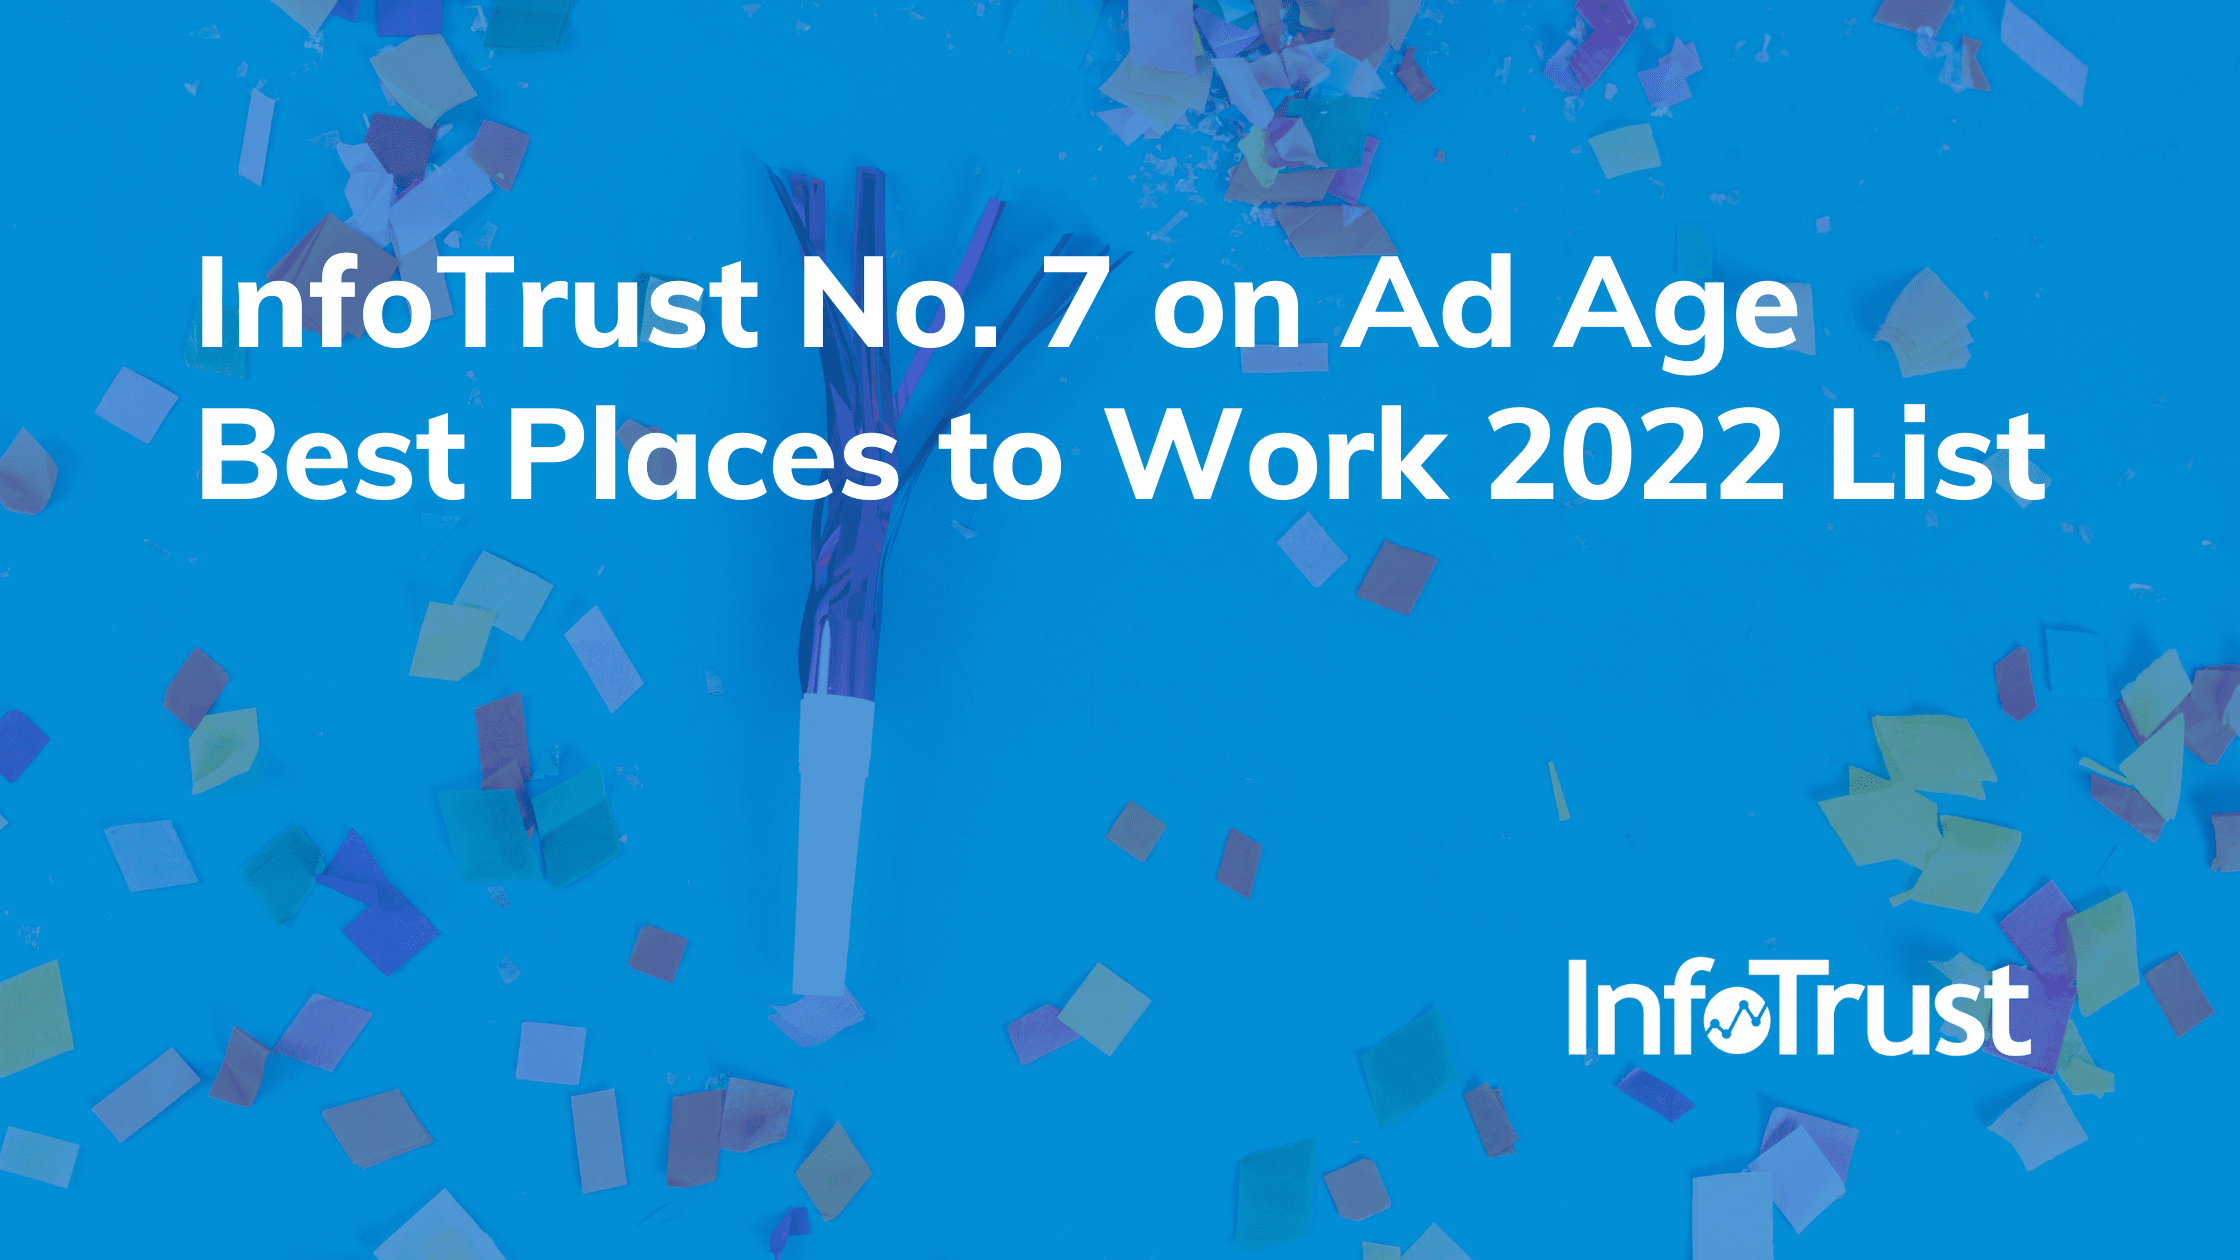 InfoTrust No. 7 on Ad Age Best Places to Work 2022 List